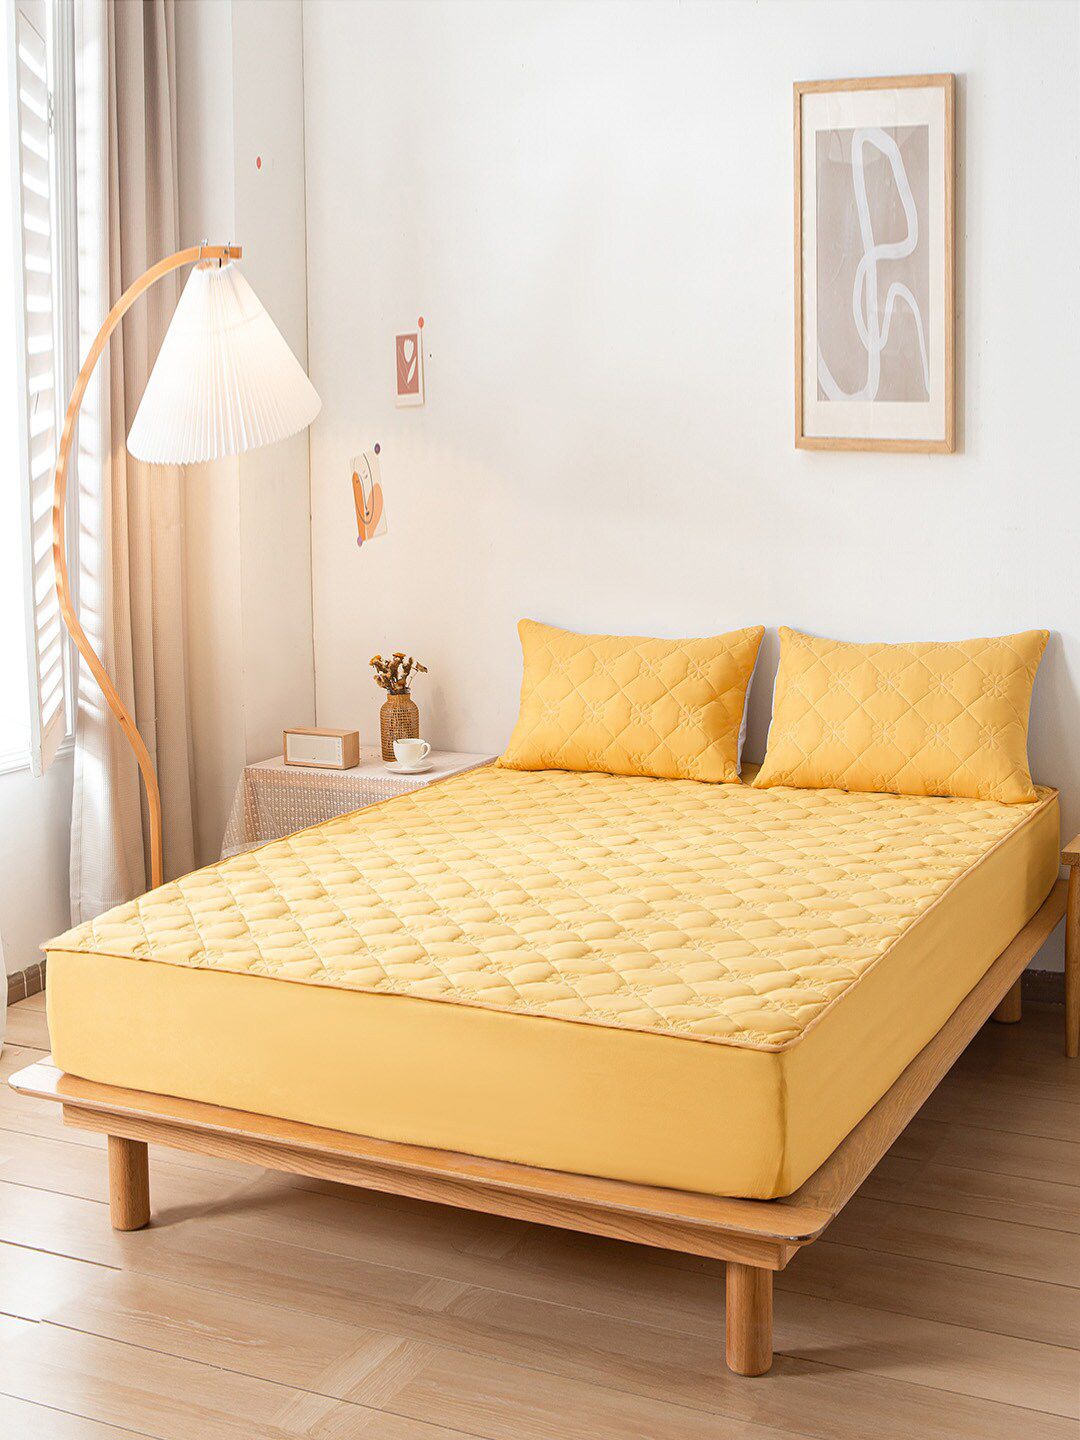 JC Collection Orange Textured Double Queen Bed Cover Price in India